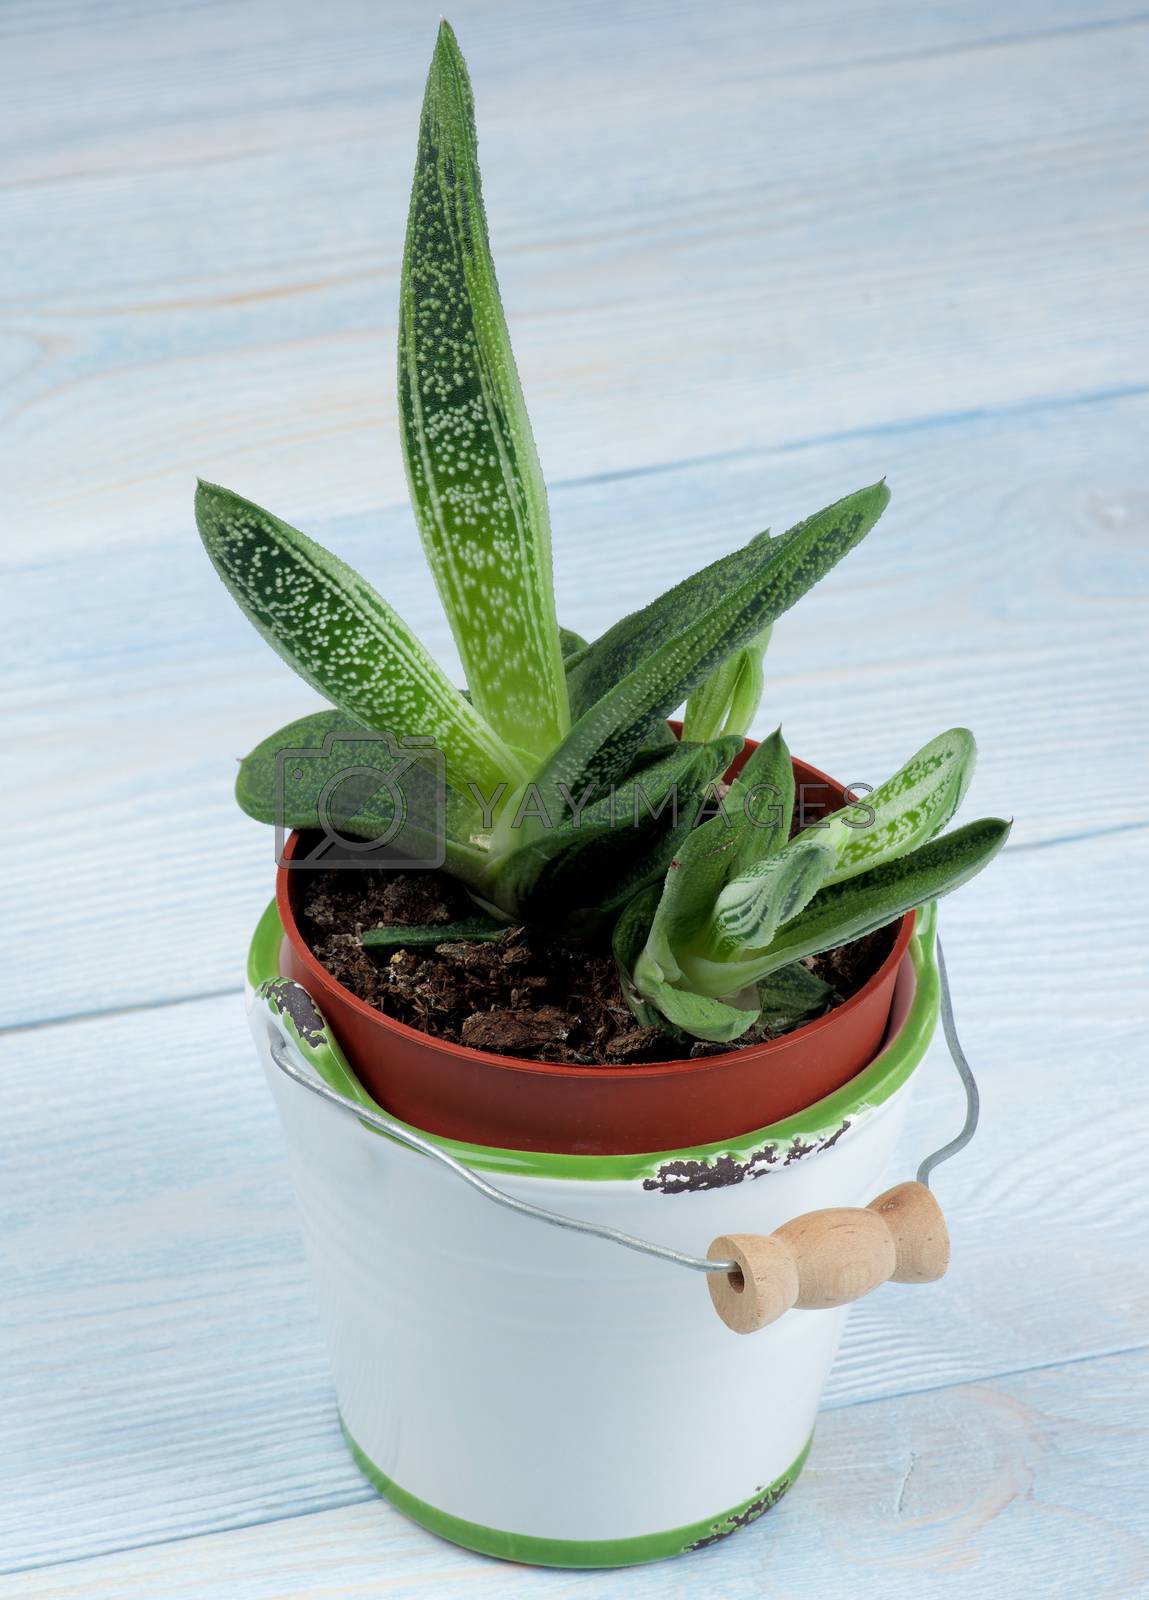 Royalty free image of Succulent Houseplant Gasteria  by zhekos